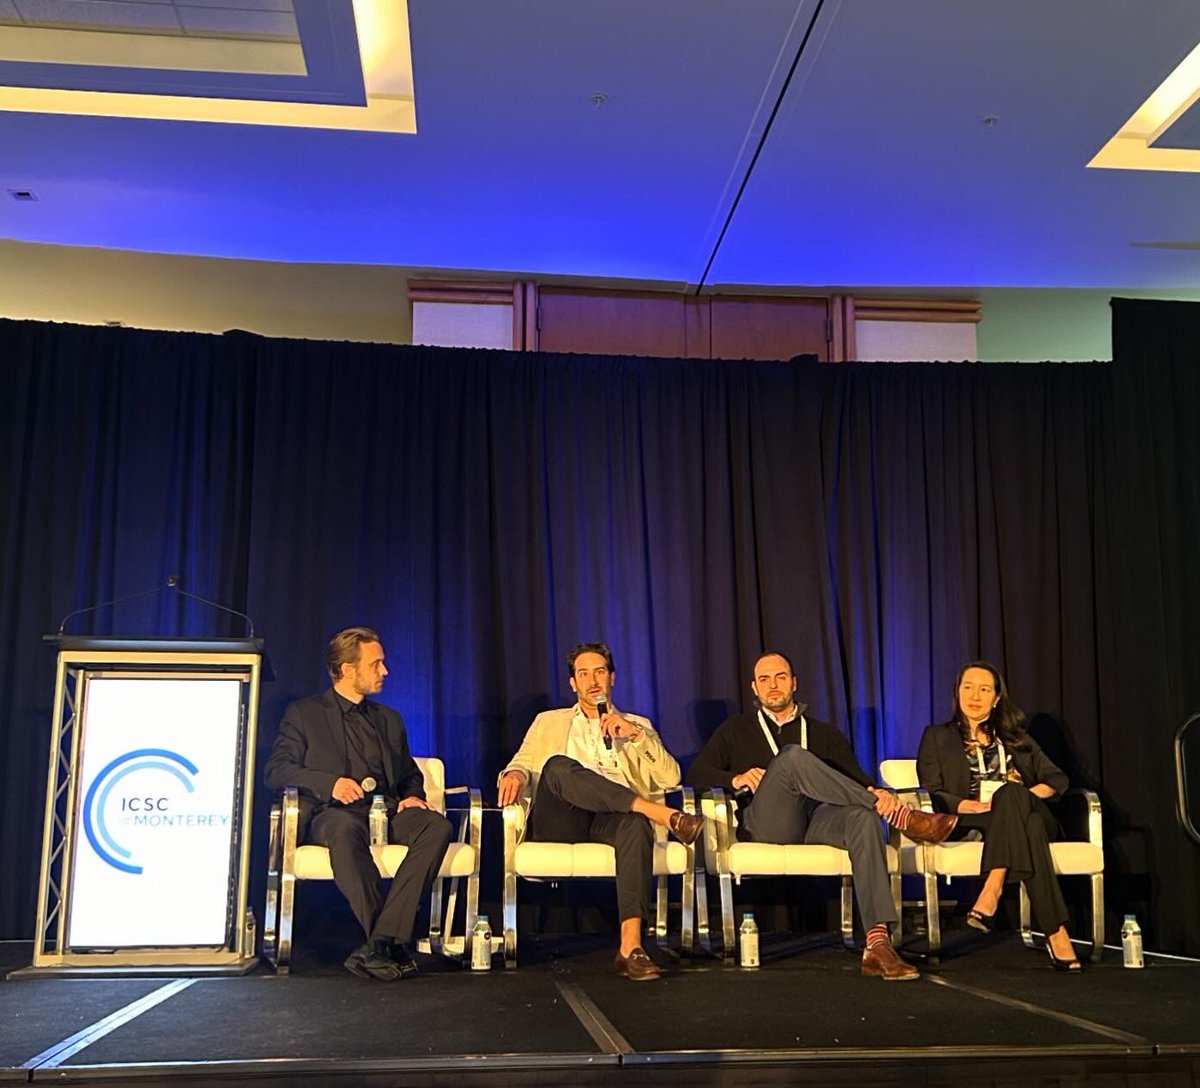 This week, Crexi's Director of Sales, @Lindman_Michael, spoke at @ICSC Monterey on the panel 'The Impact of Technology on Business: How Innovation is Enhancing Workplace Productivity.'